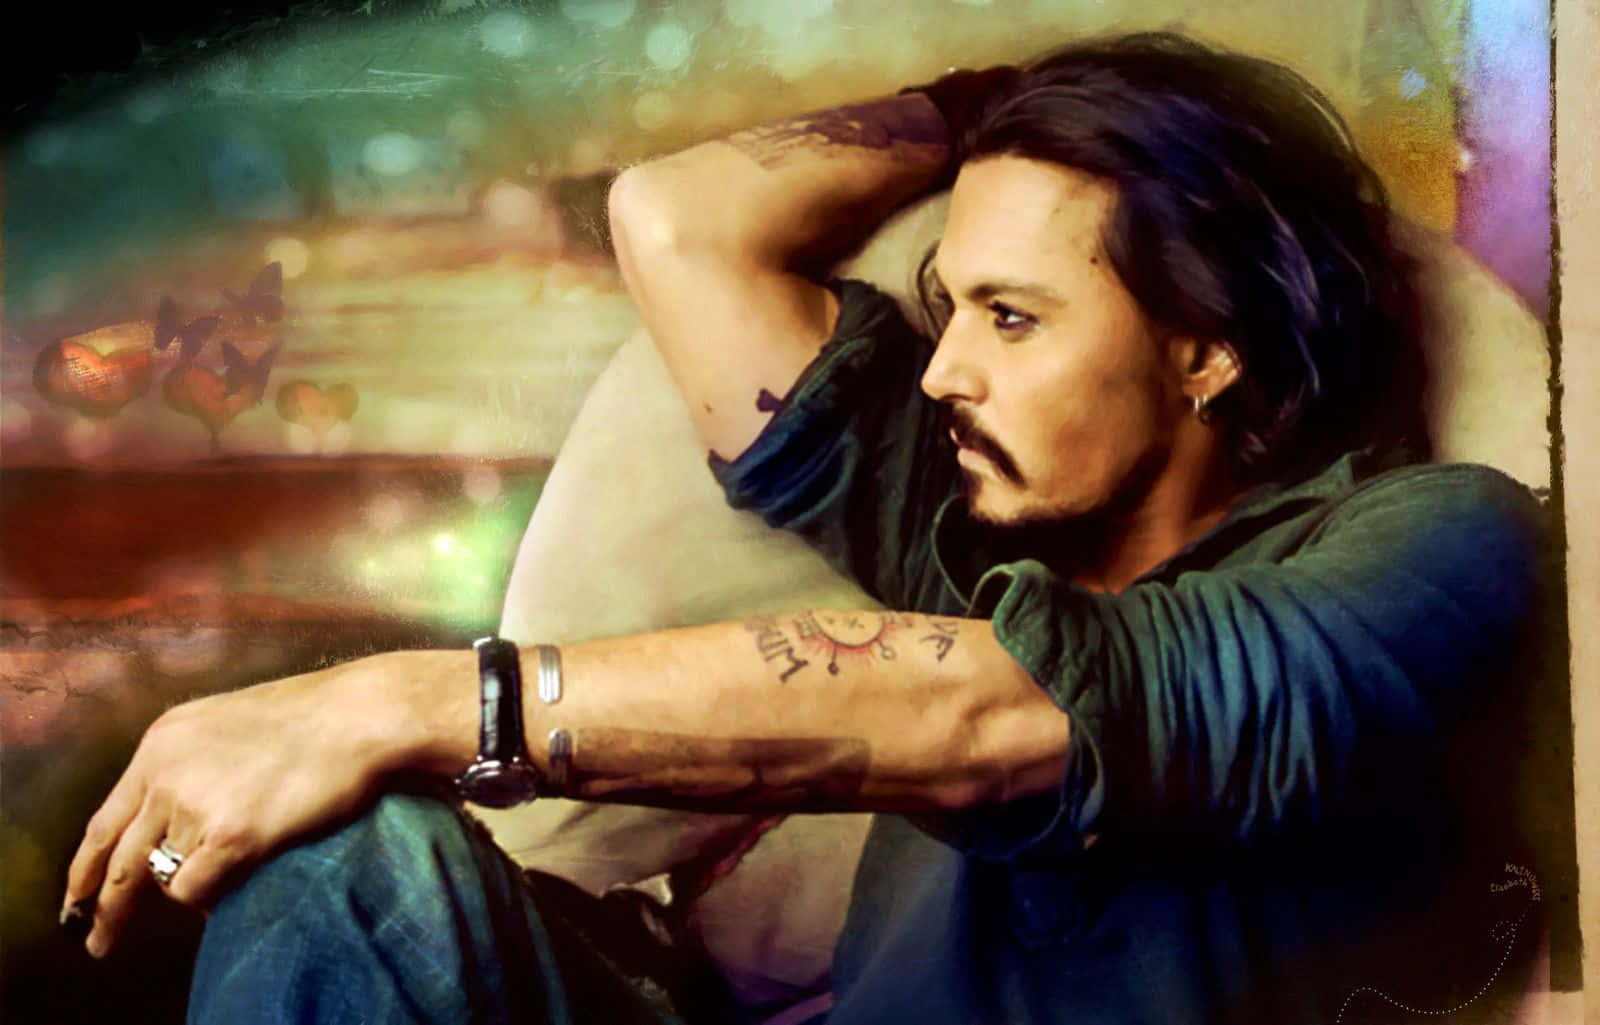 Image  Johnny Depp looking handsome and cool.